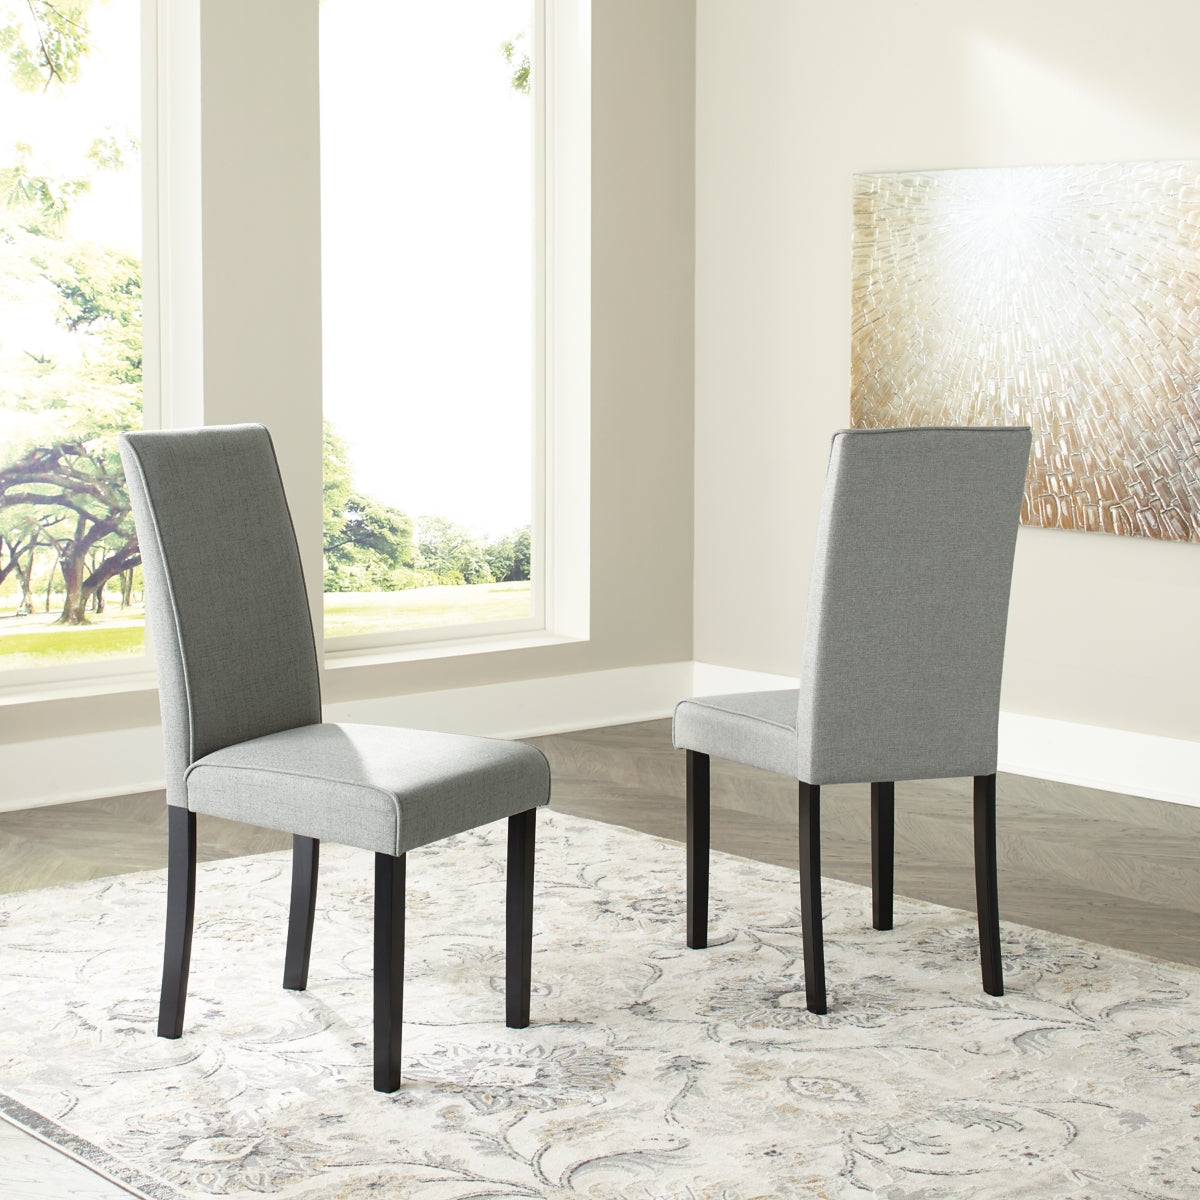 Kimonte Dining Table and 4 Chairs - PKG013926 - furniture place usa